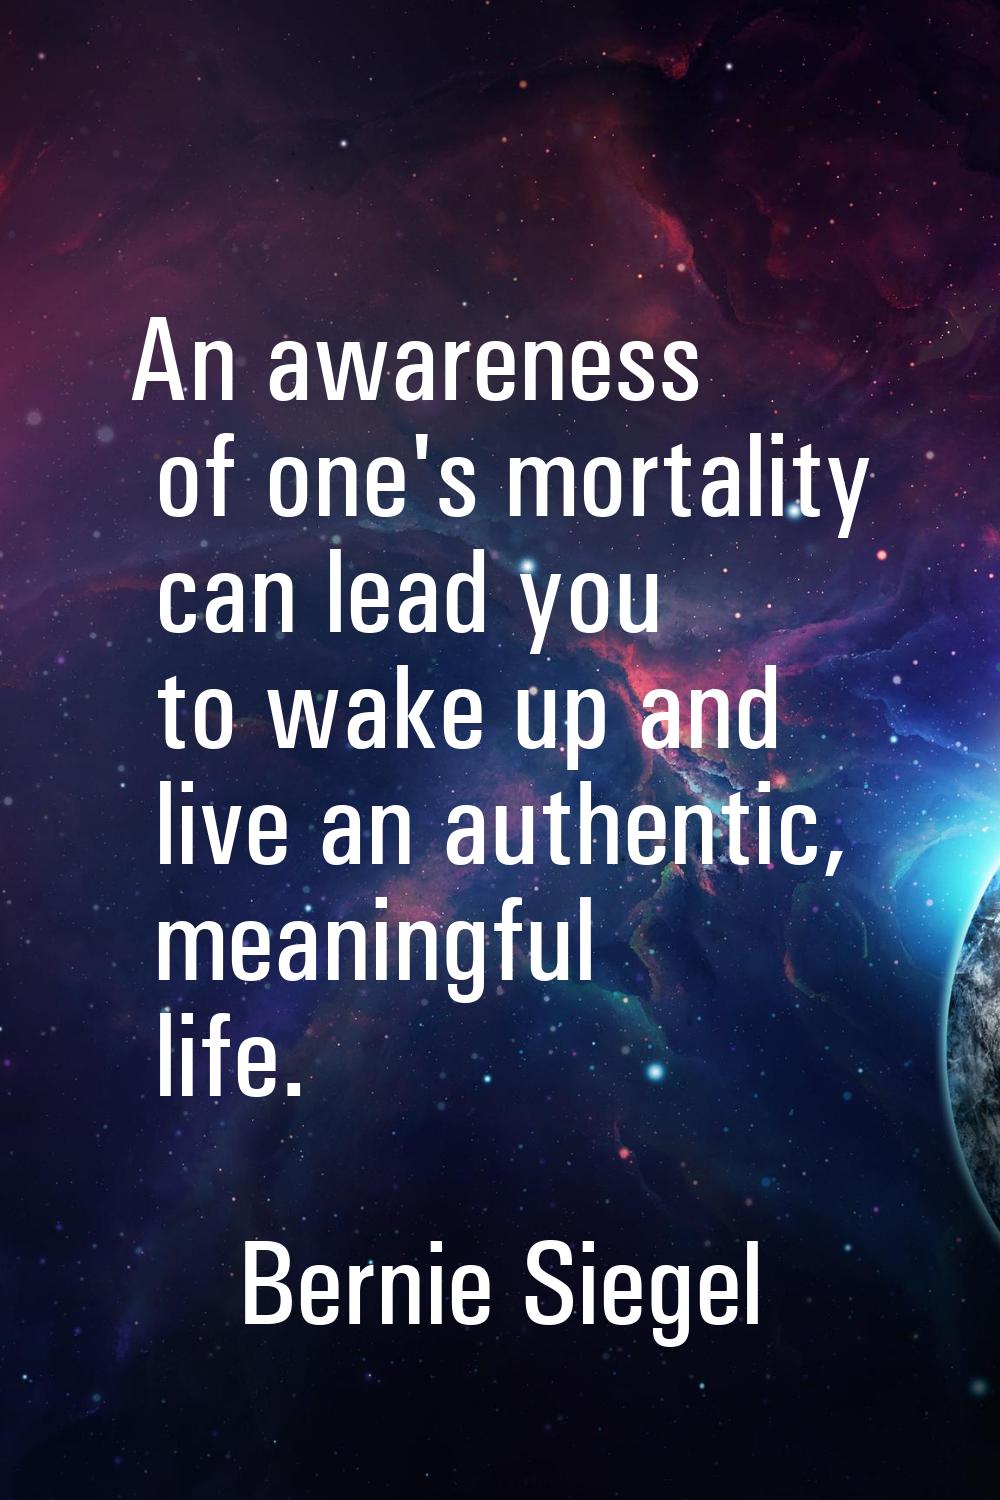 An awareness of one's mortality can lead you to wake up and live an authentic, meaningful life.